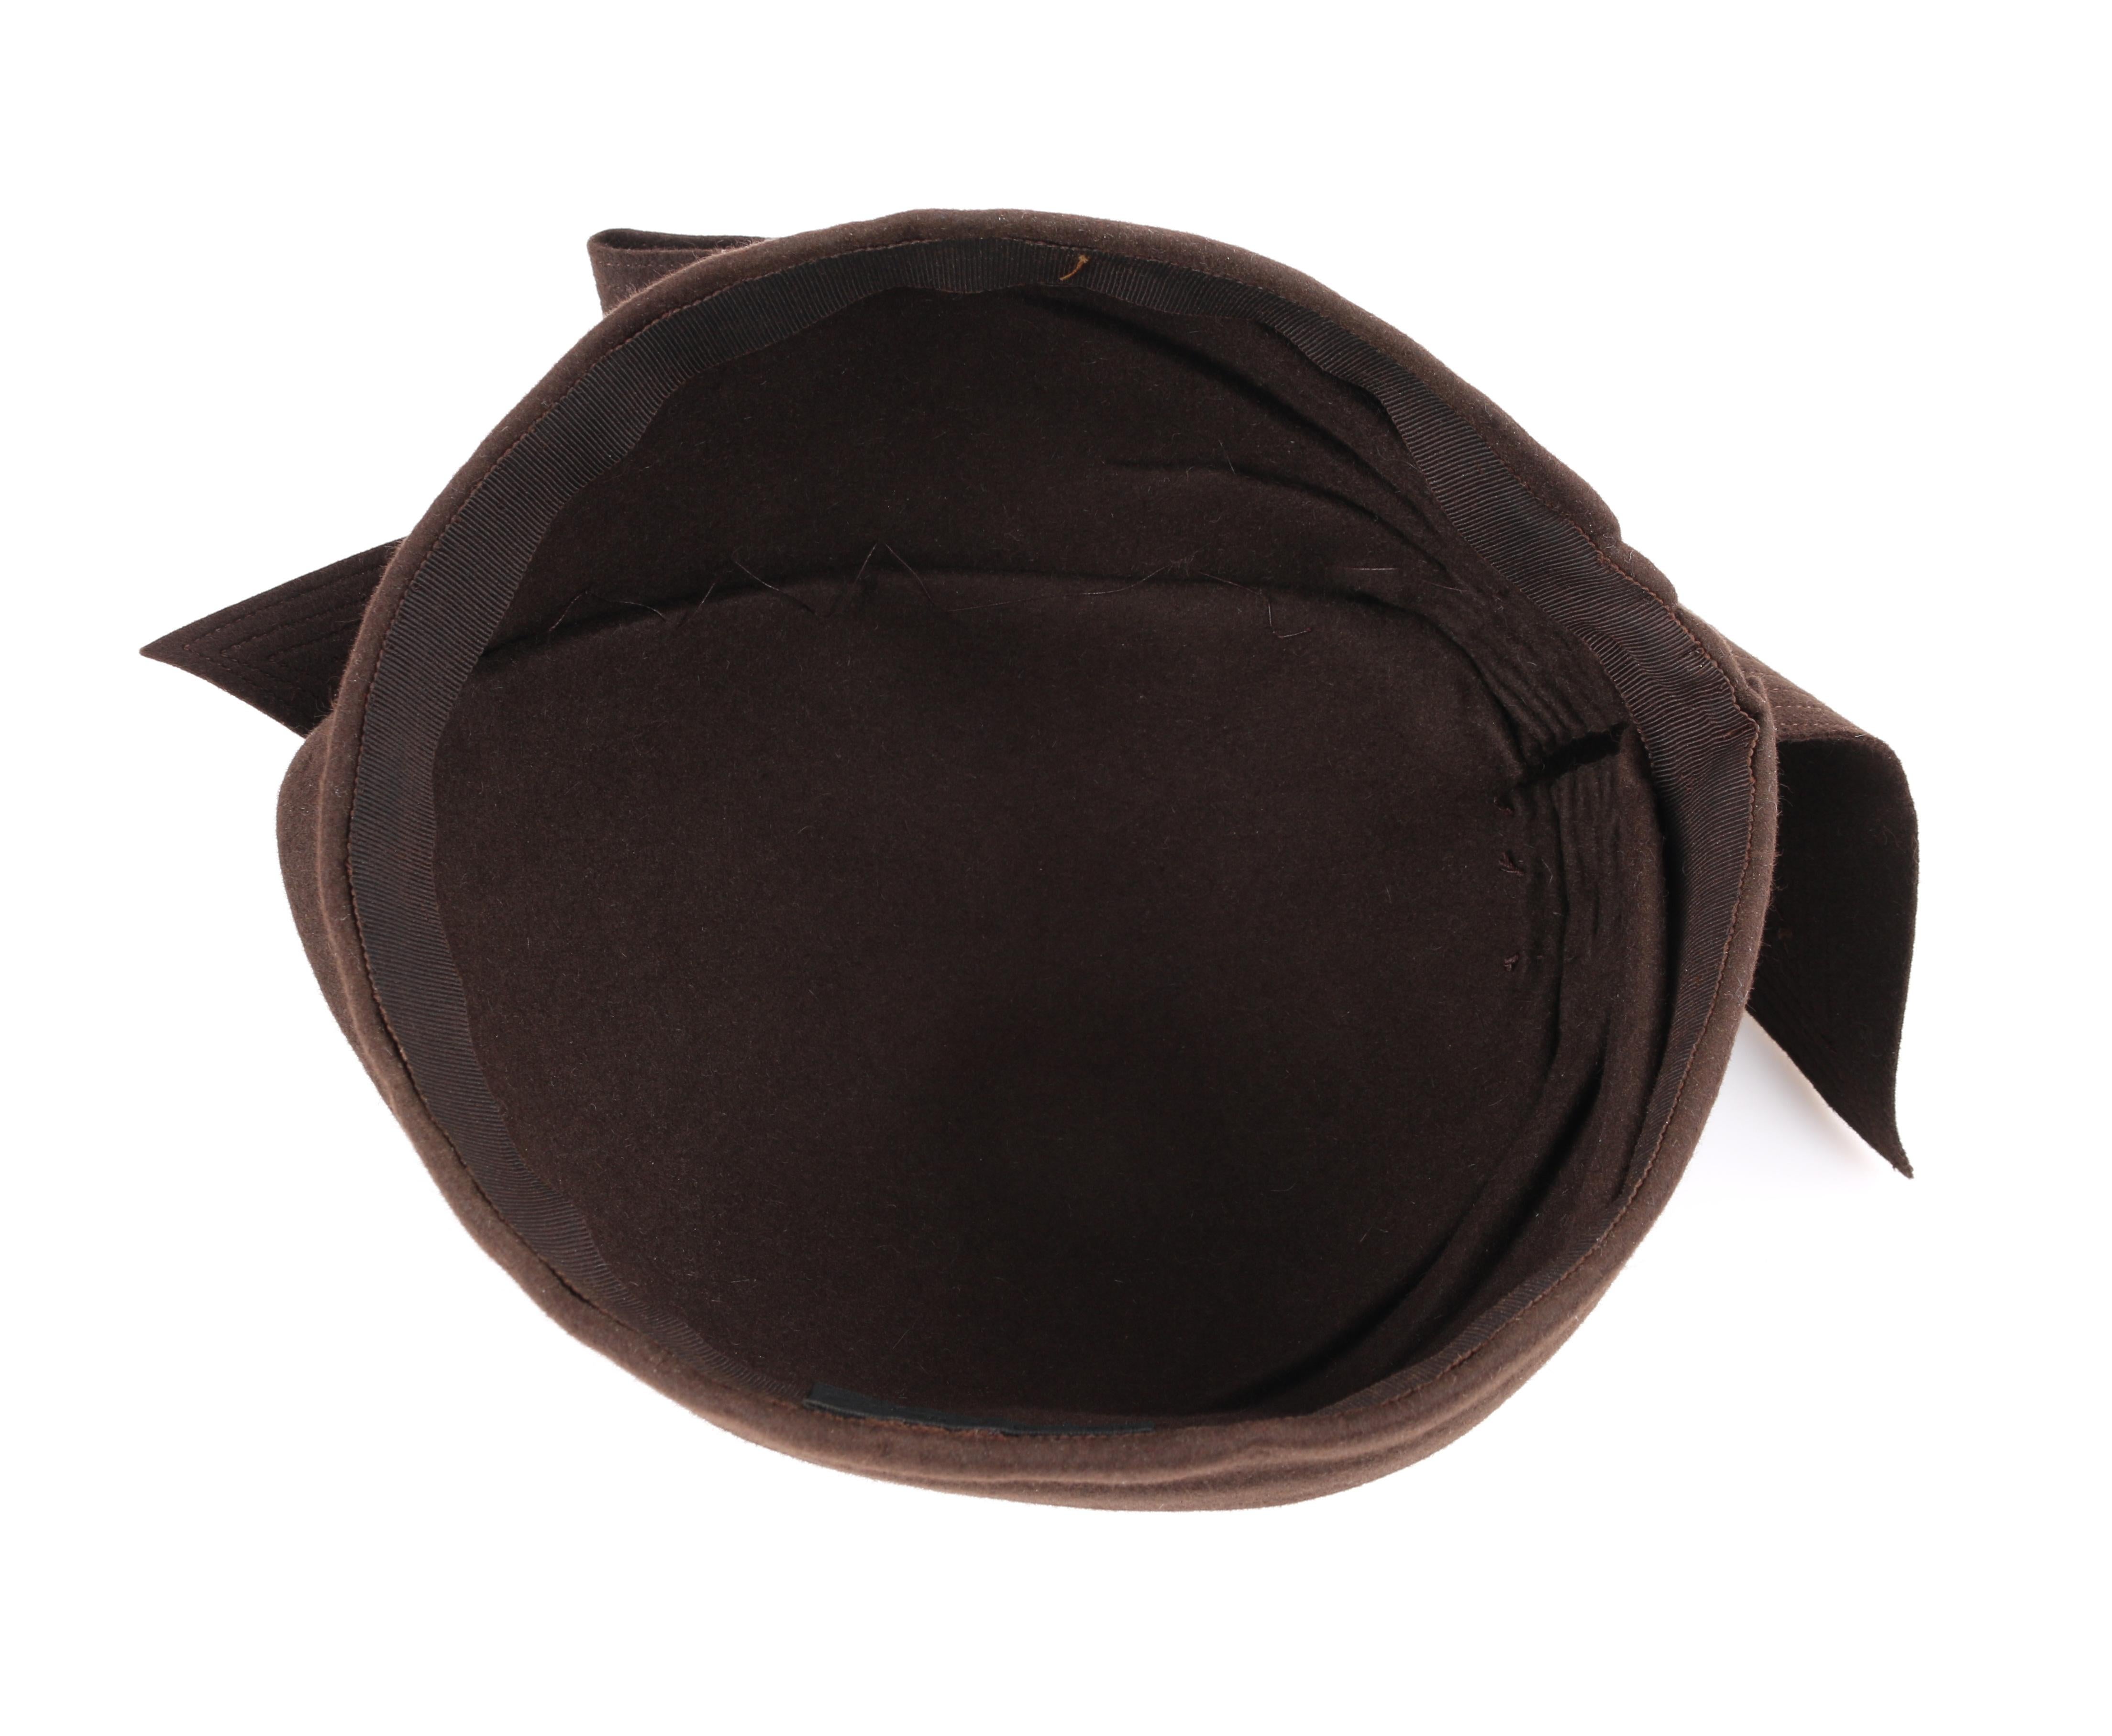 FLORENCE MILLINERY COUTURE c.1940s Chocolate Brown Felt Front Bow Turban Hat 1